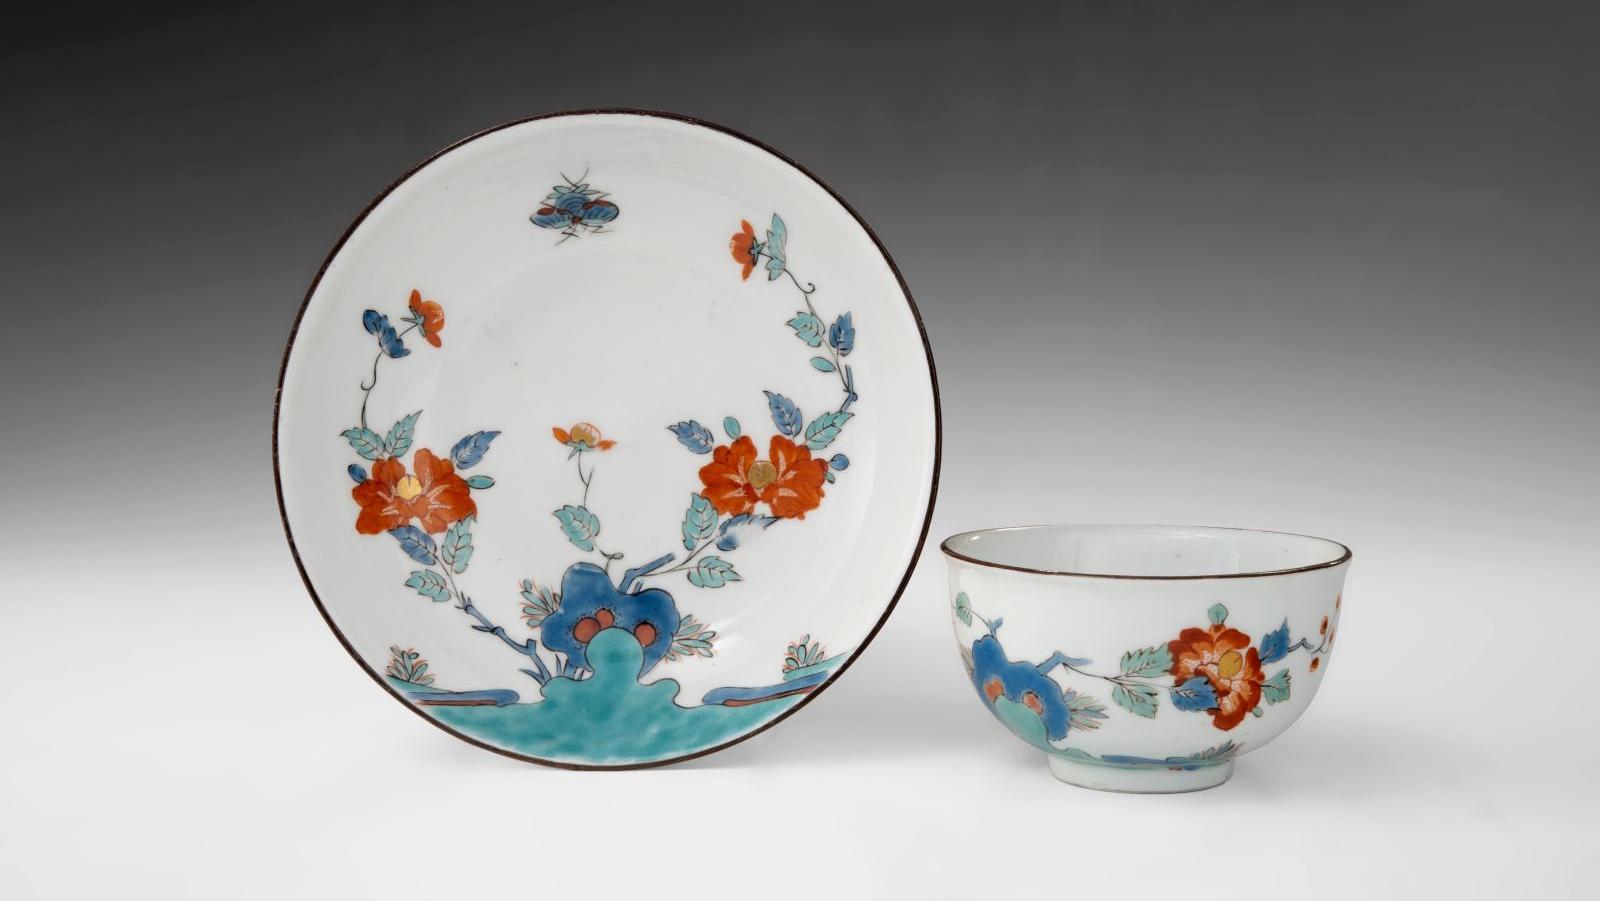 Meissen, around 1735, bowl and saucer in porcelain, polychrome and gold fillet enamel,... Meissen: A Passion for Porcelain